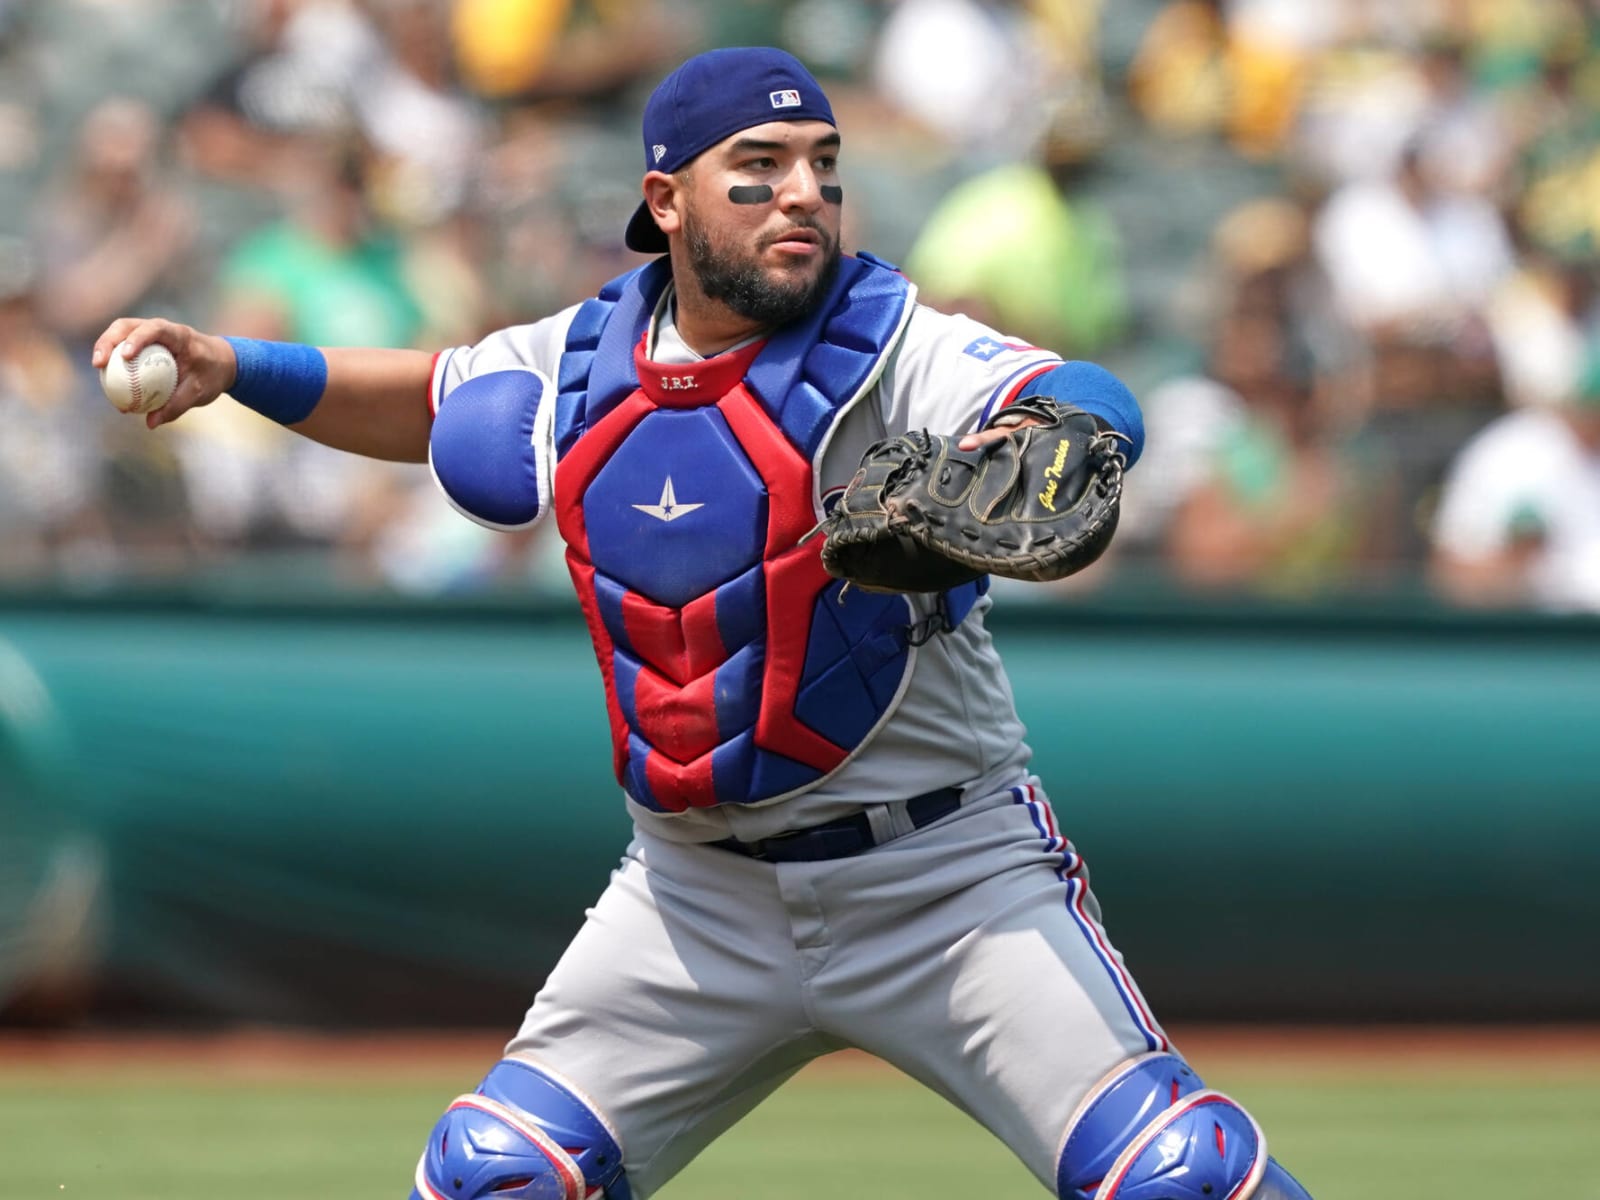 Yankees acquire catcher Jose Trevino in three-player trade with